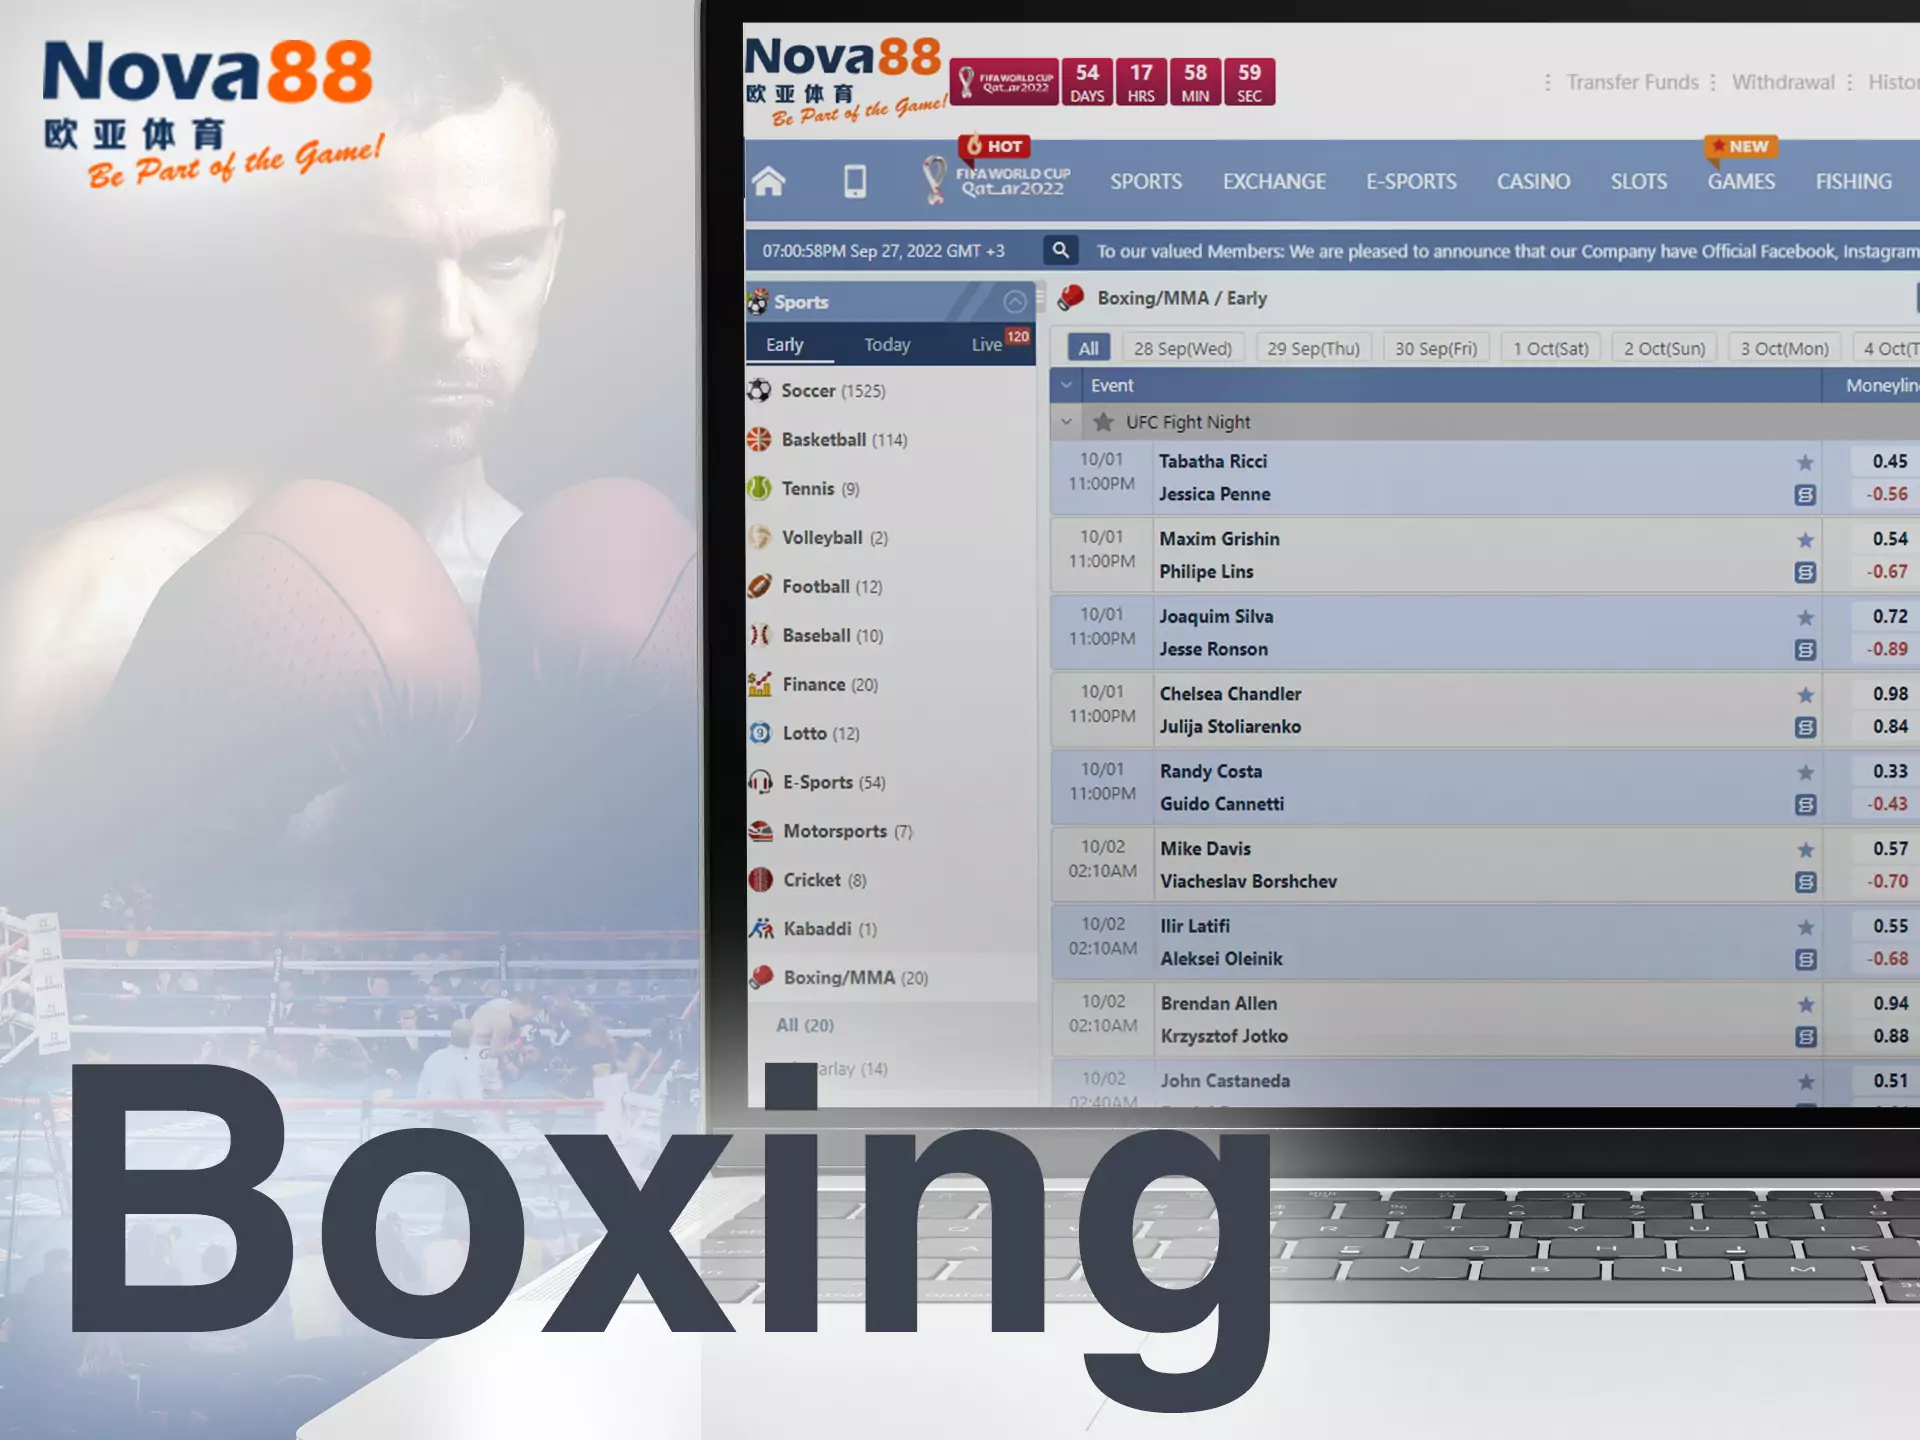 In the Nova88 sportsbook, you can bet on boxing fights online.